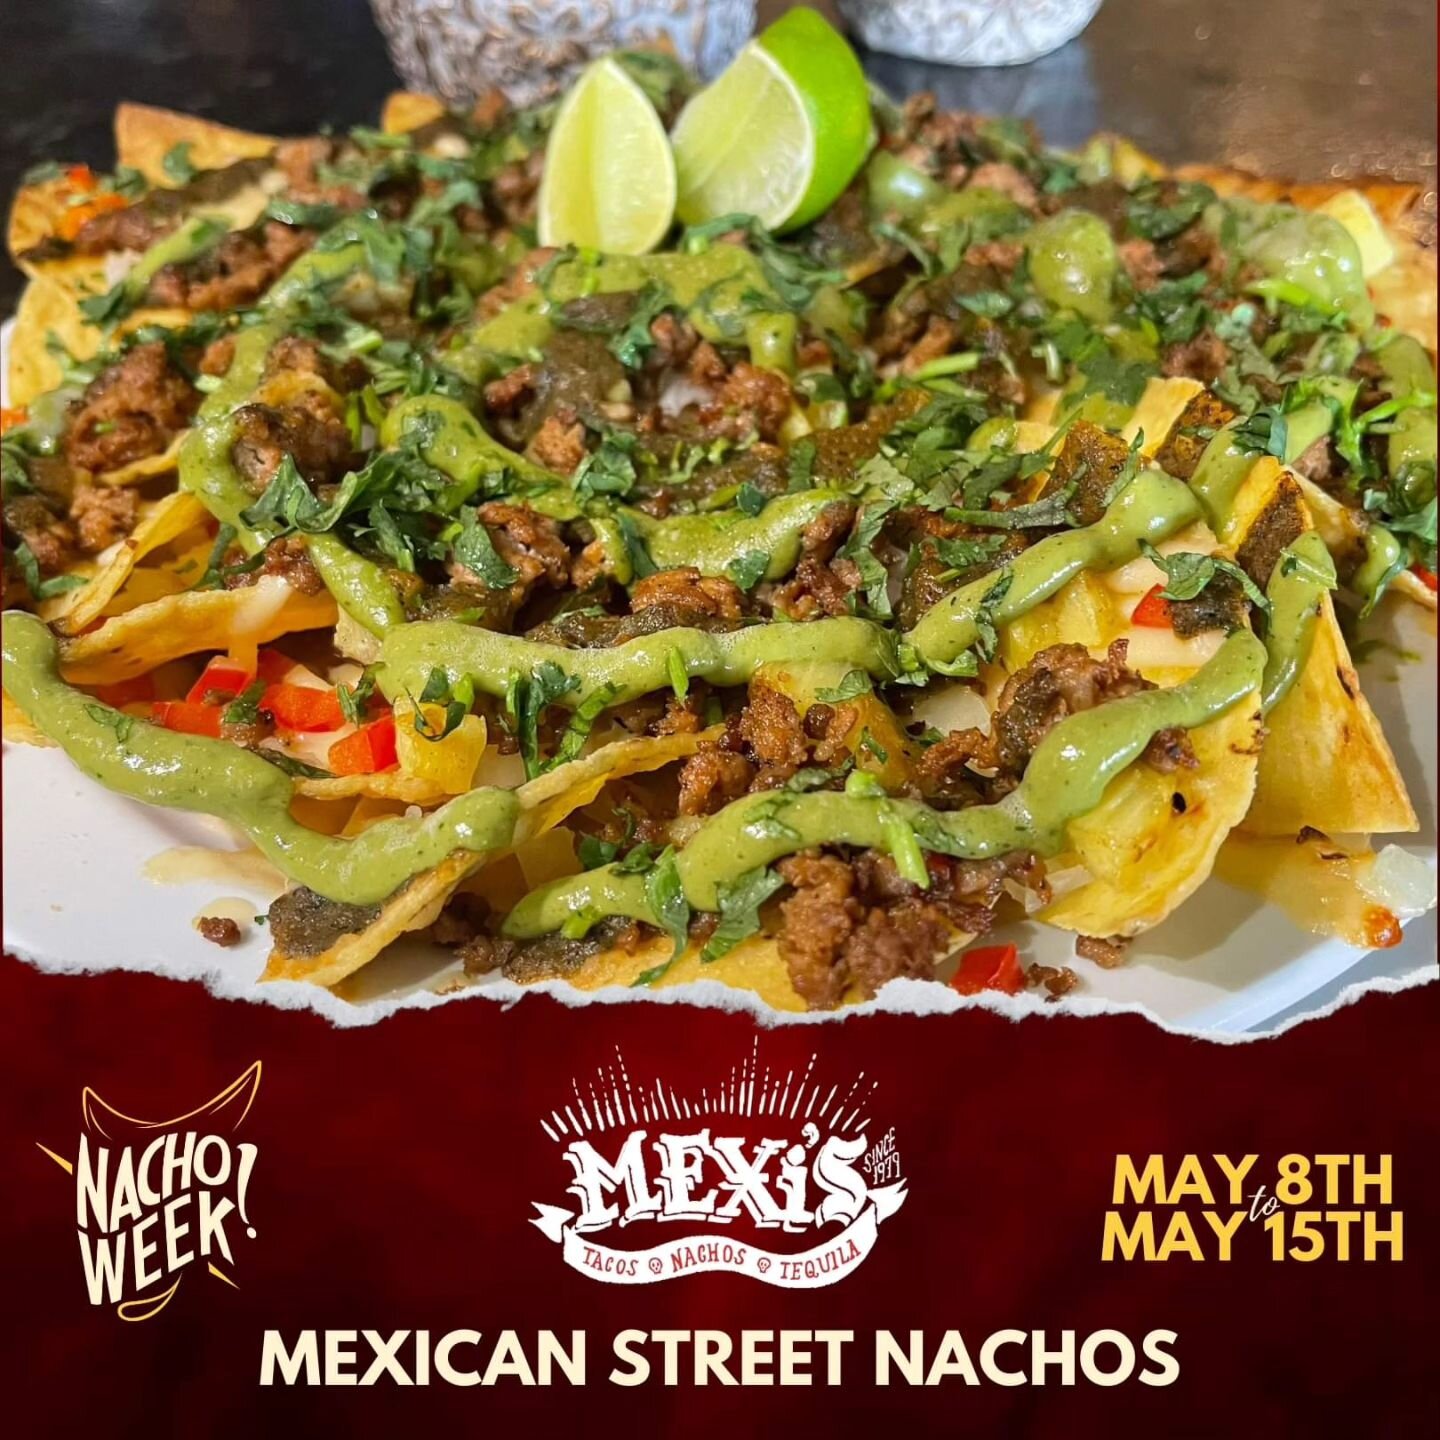 Get ready for a fiesta in your mouth with the ultimate Mexican Street Nachos! 🥑🍍🍃

Made with crispy corn chips, grilled pineapple, Mexican chorizo sausage, melted Monterey jack cheese, fresh peppers and onions, and topped with creamy avocado crema